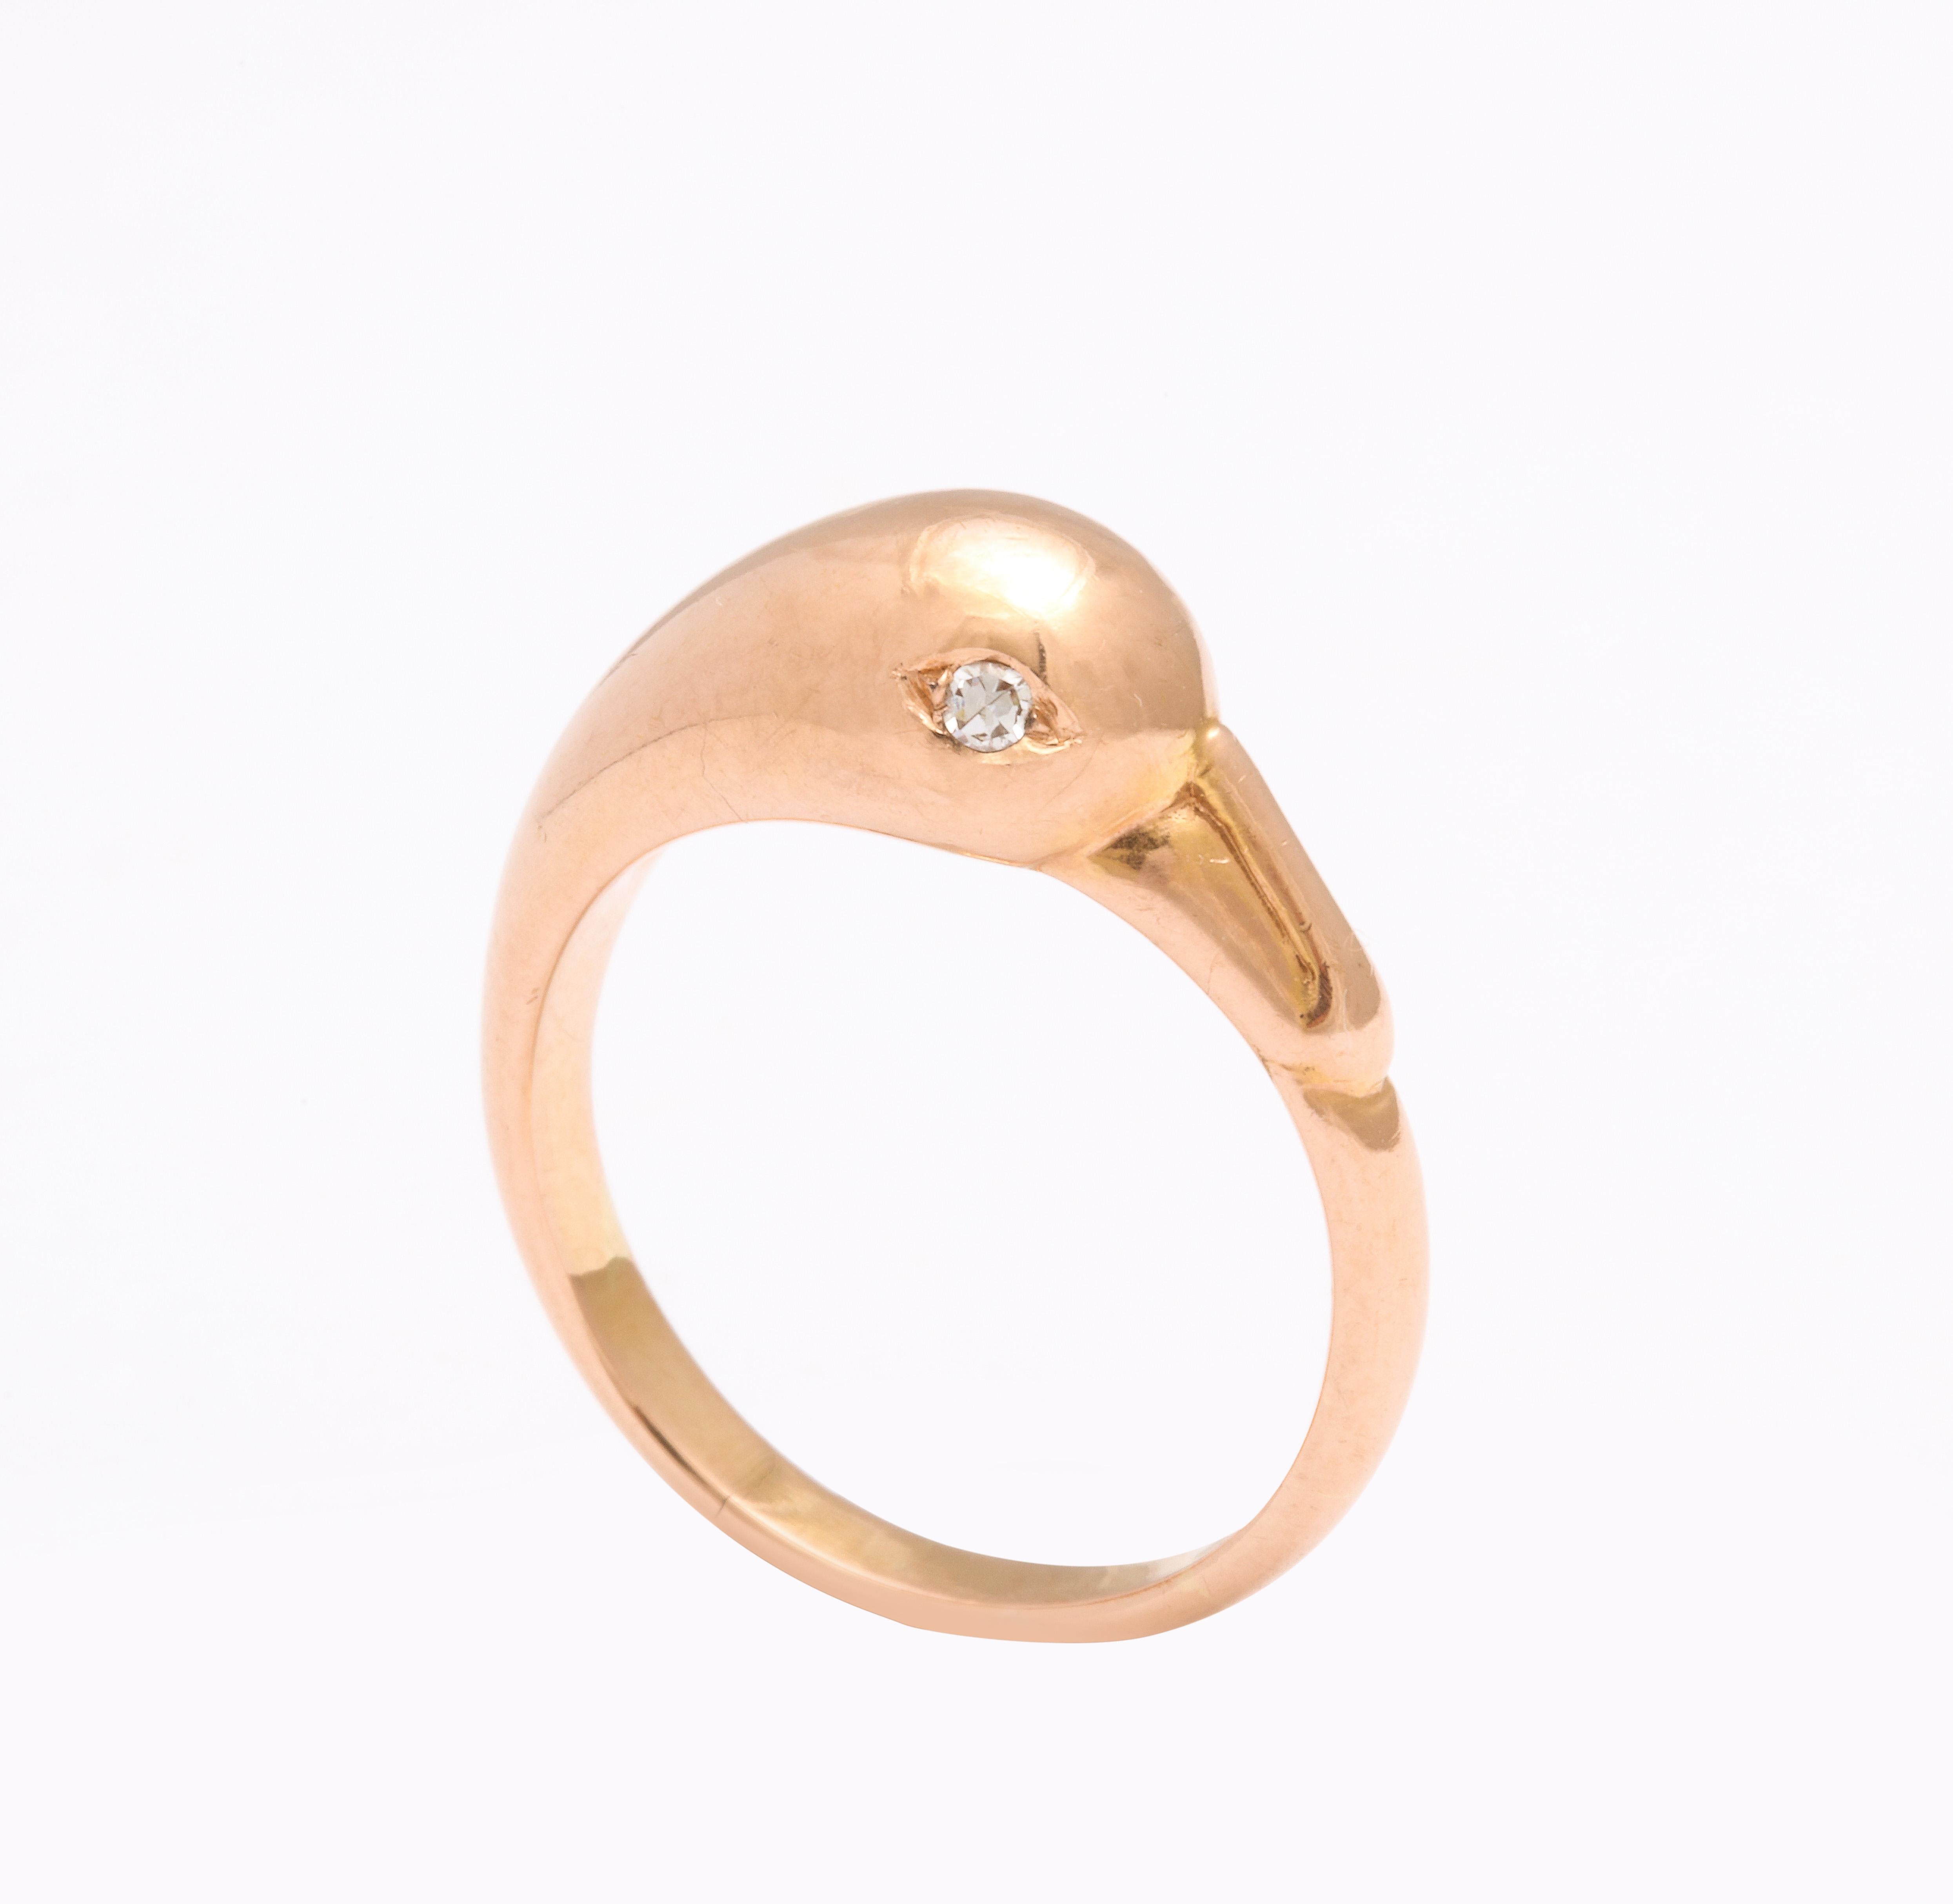 A romantic 18 Kt swan ring brings the symbol of  purity, fidelity in marriage and monogamy. A graceful ring in which the swan's beak touches its tail in the sign of infinite love. Like an infinity symbol or love know there is no beginning or end.